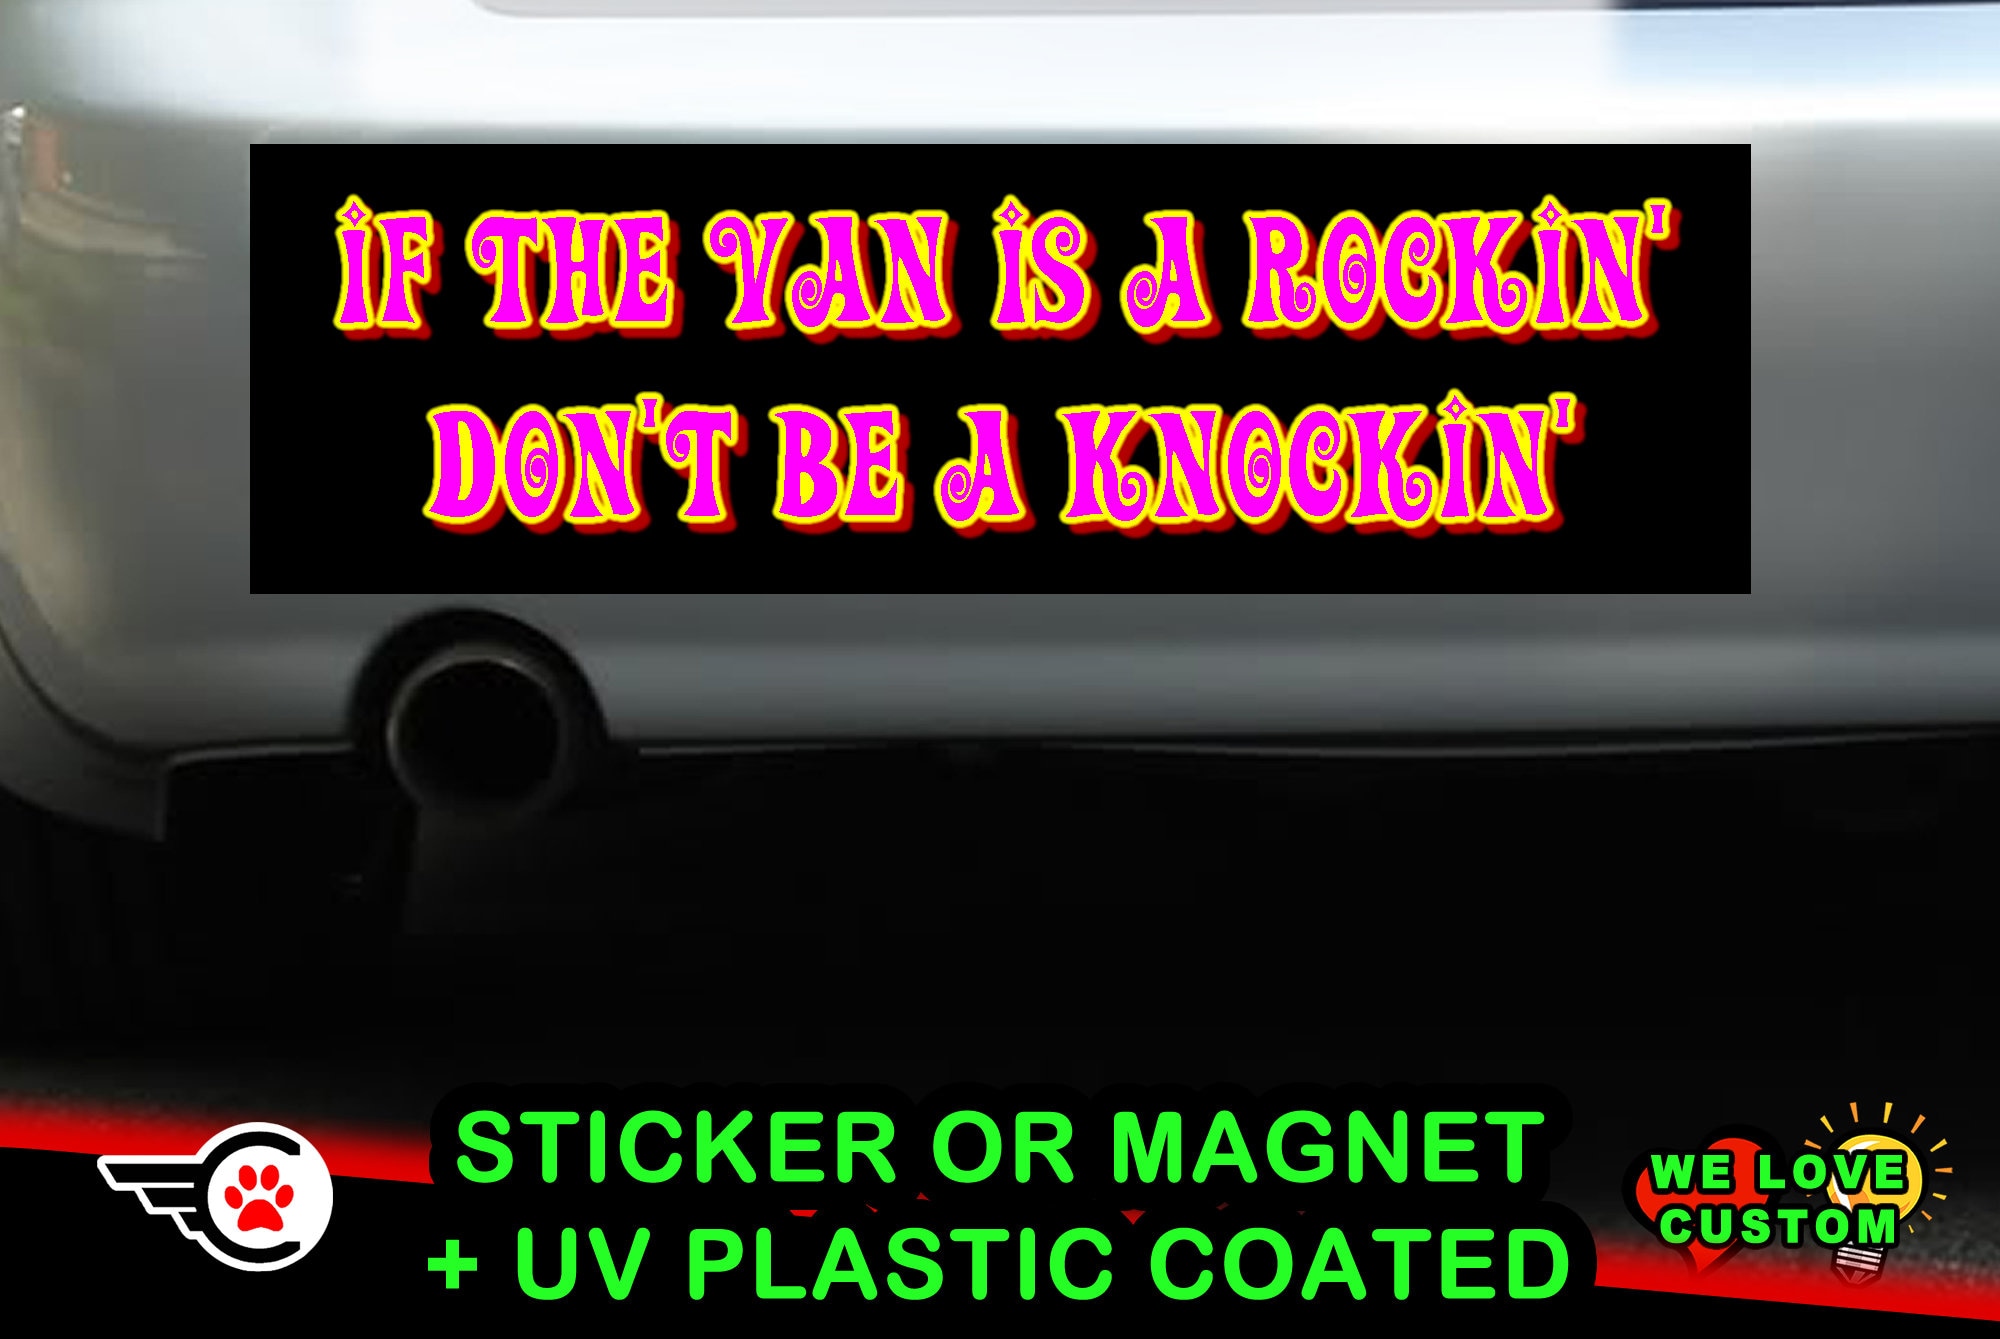 If the van is a rockin' don't be a knockin' Funny Bumper Sticker or Magnet in a variety of sizes